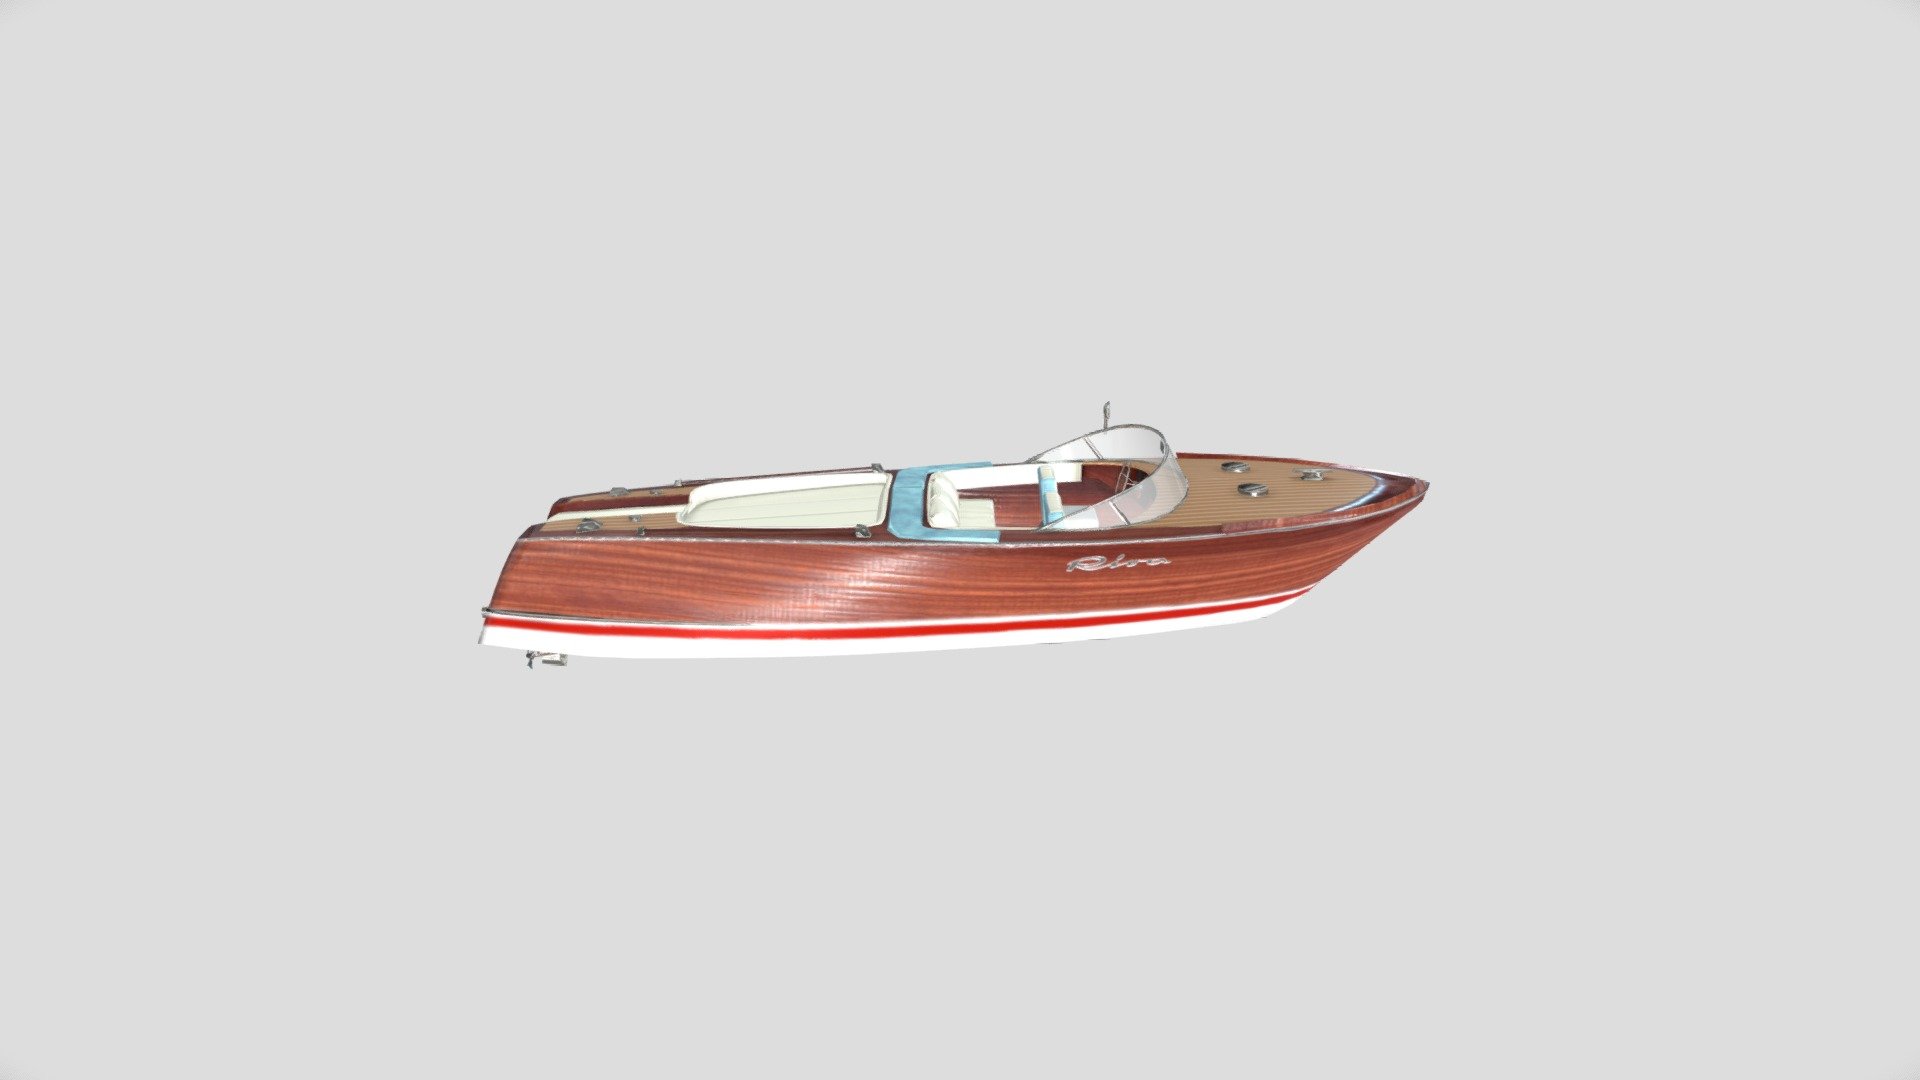 A low poly model of iconic Riva Aquarama. That was a quick project to accomplish on a weekend and I like the shapes of it, feel free to use the model for your own purpose, I will set it free. The models has 1K textures and 4000 tris 3d model